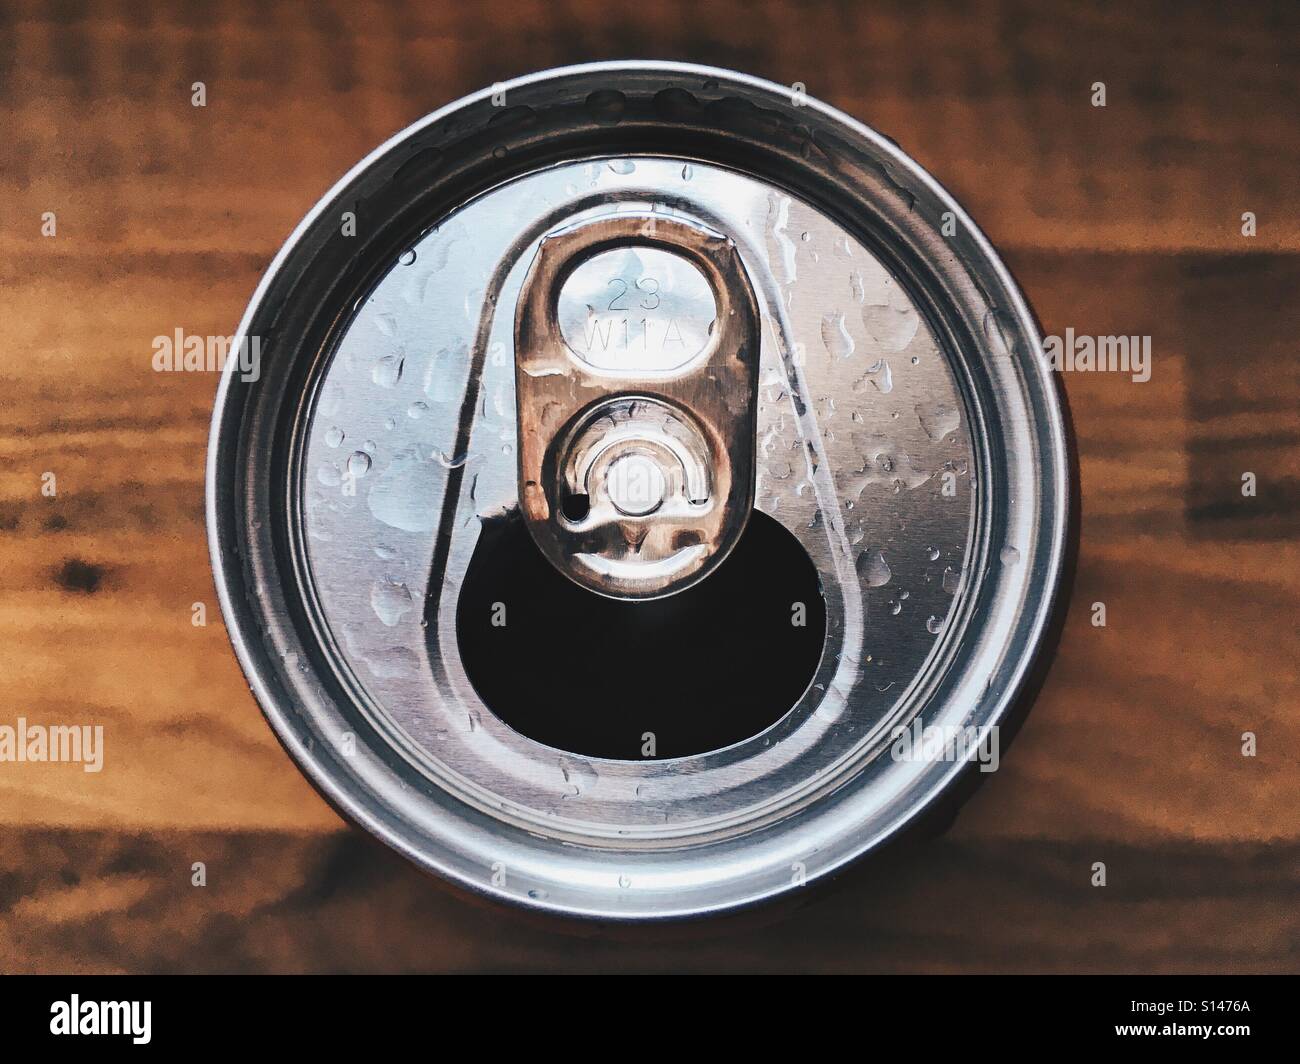 Drinks can. Stock Photo